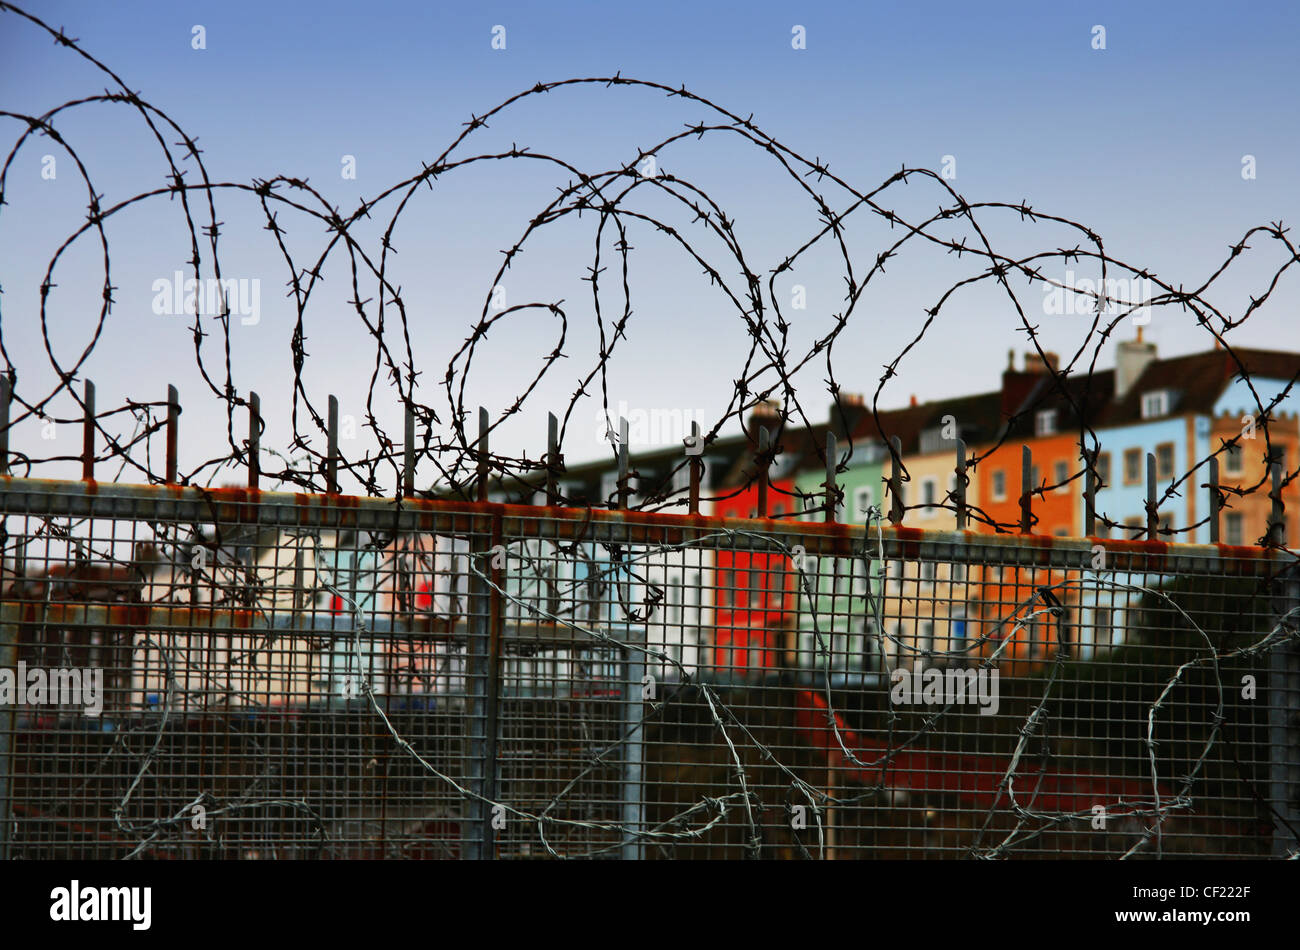 Row Houses Seen From Behind A Barbed Wire Fence; Bristol England Stock Photo